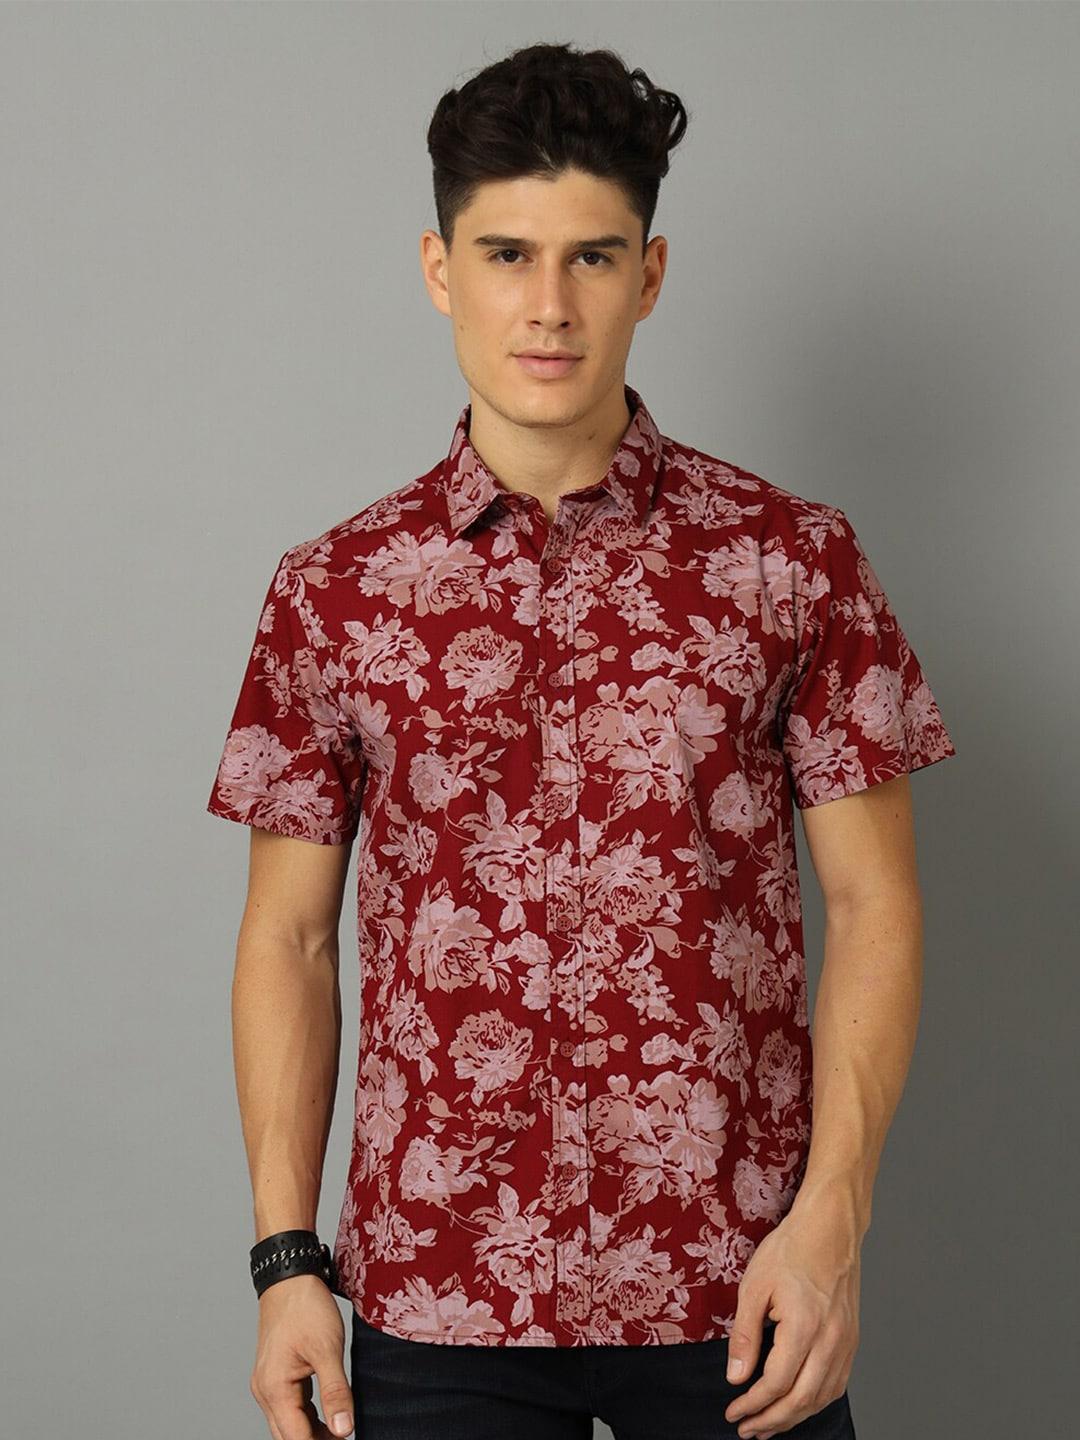 Voi Jeans Floral Printed Spread Collar Slim Fit Pure Cotton Casual Shirt